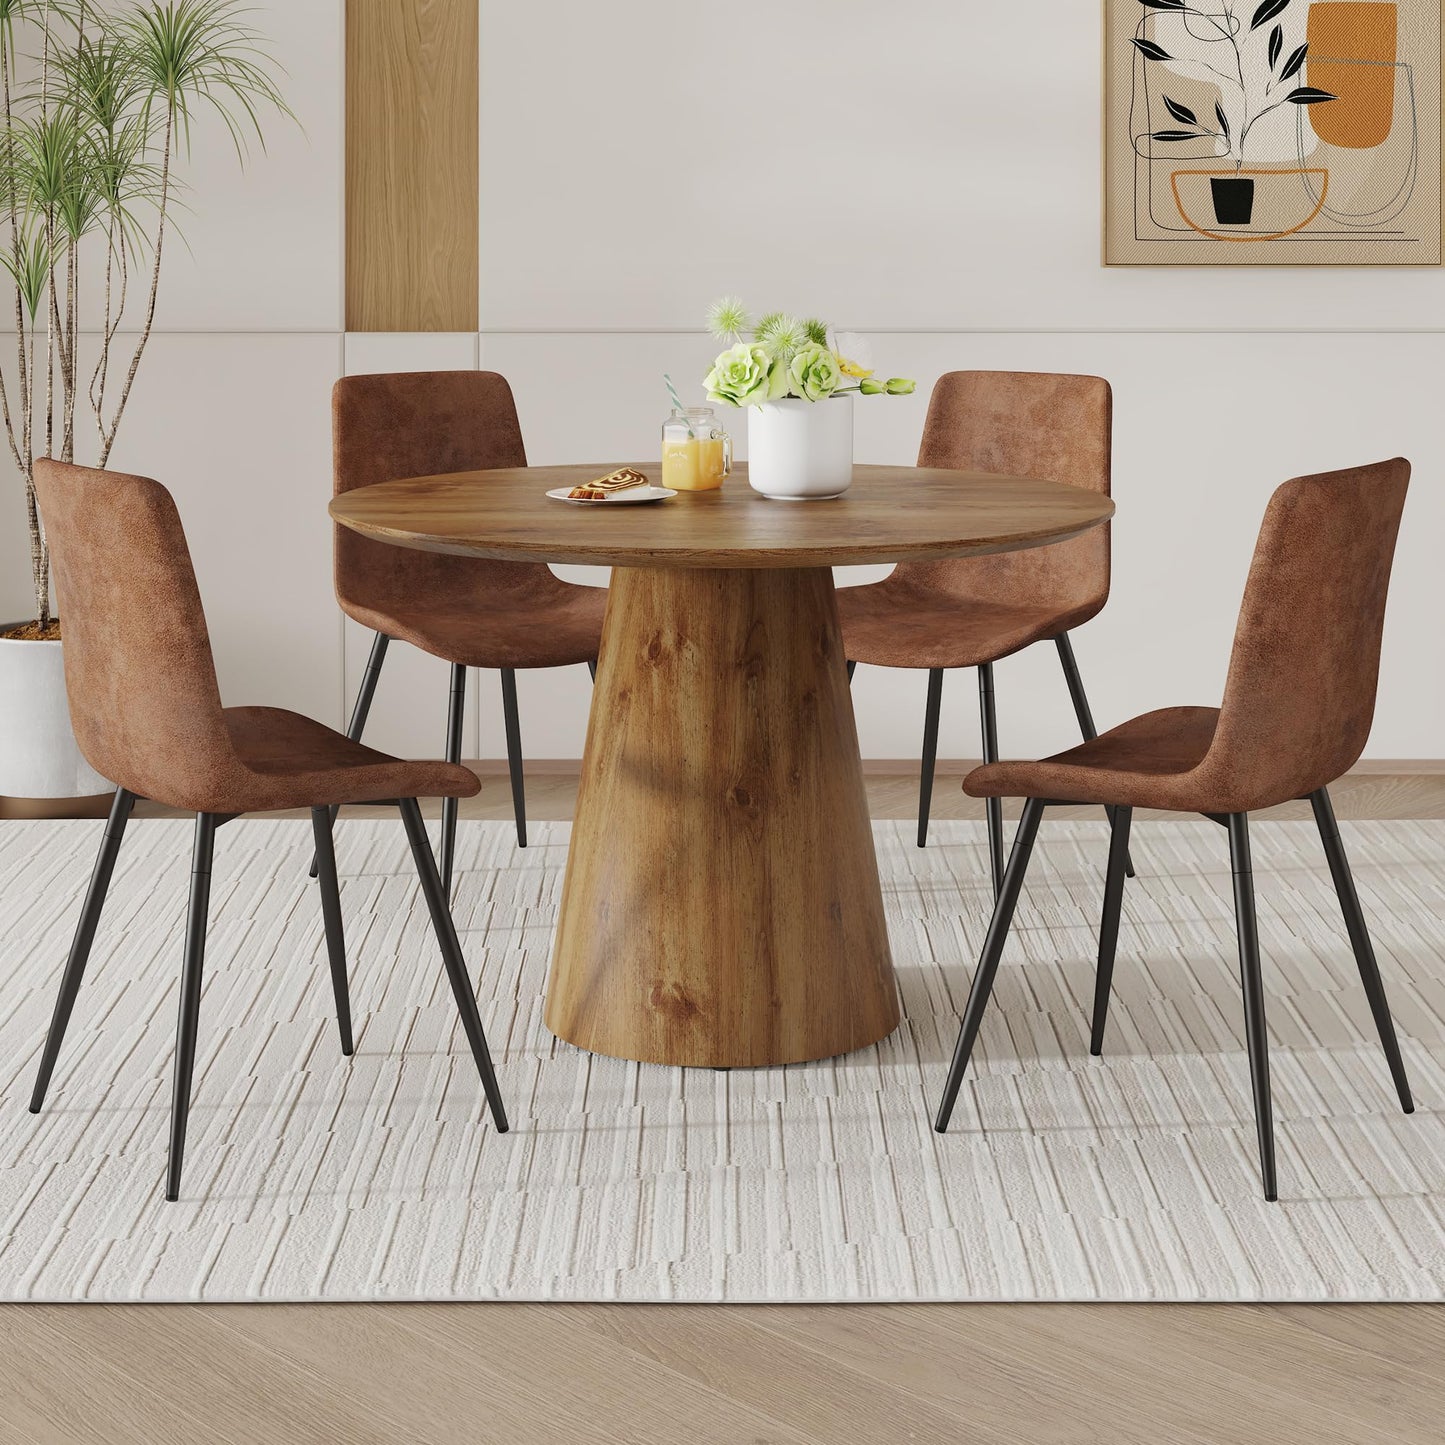 5 Piece Round Dining Table Set, Modern Kitchen Table and Chairs Set for 4, Wooden Table with 2.4-inch Thick Tabletop&4 Mid Century Upholstered Chairs with Soft Linen Fabric Cushion Seat&Metal Legs.